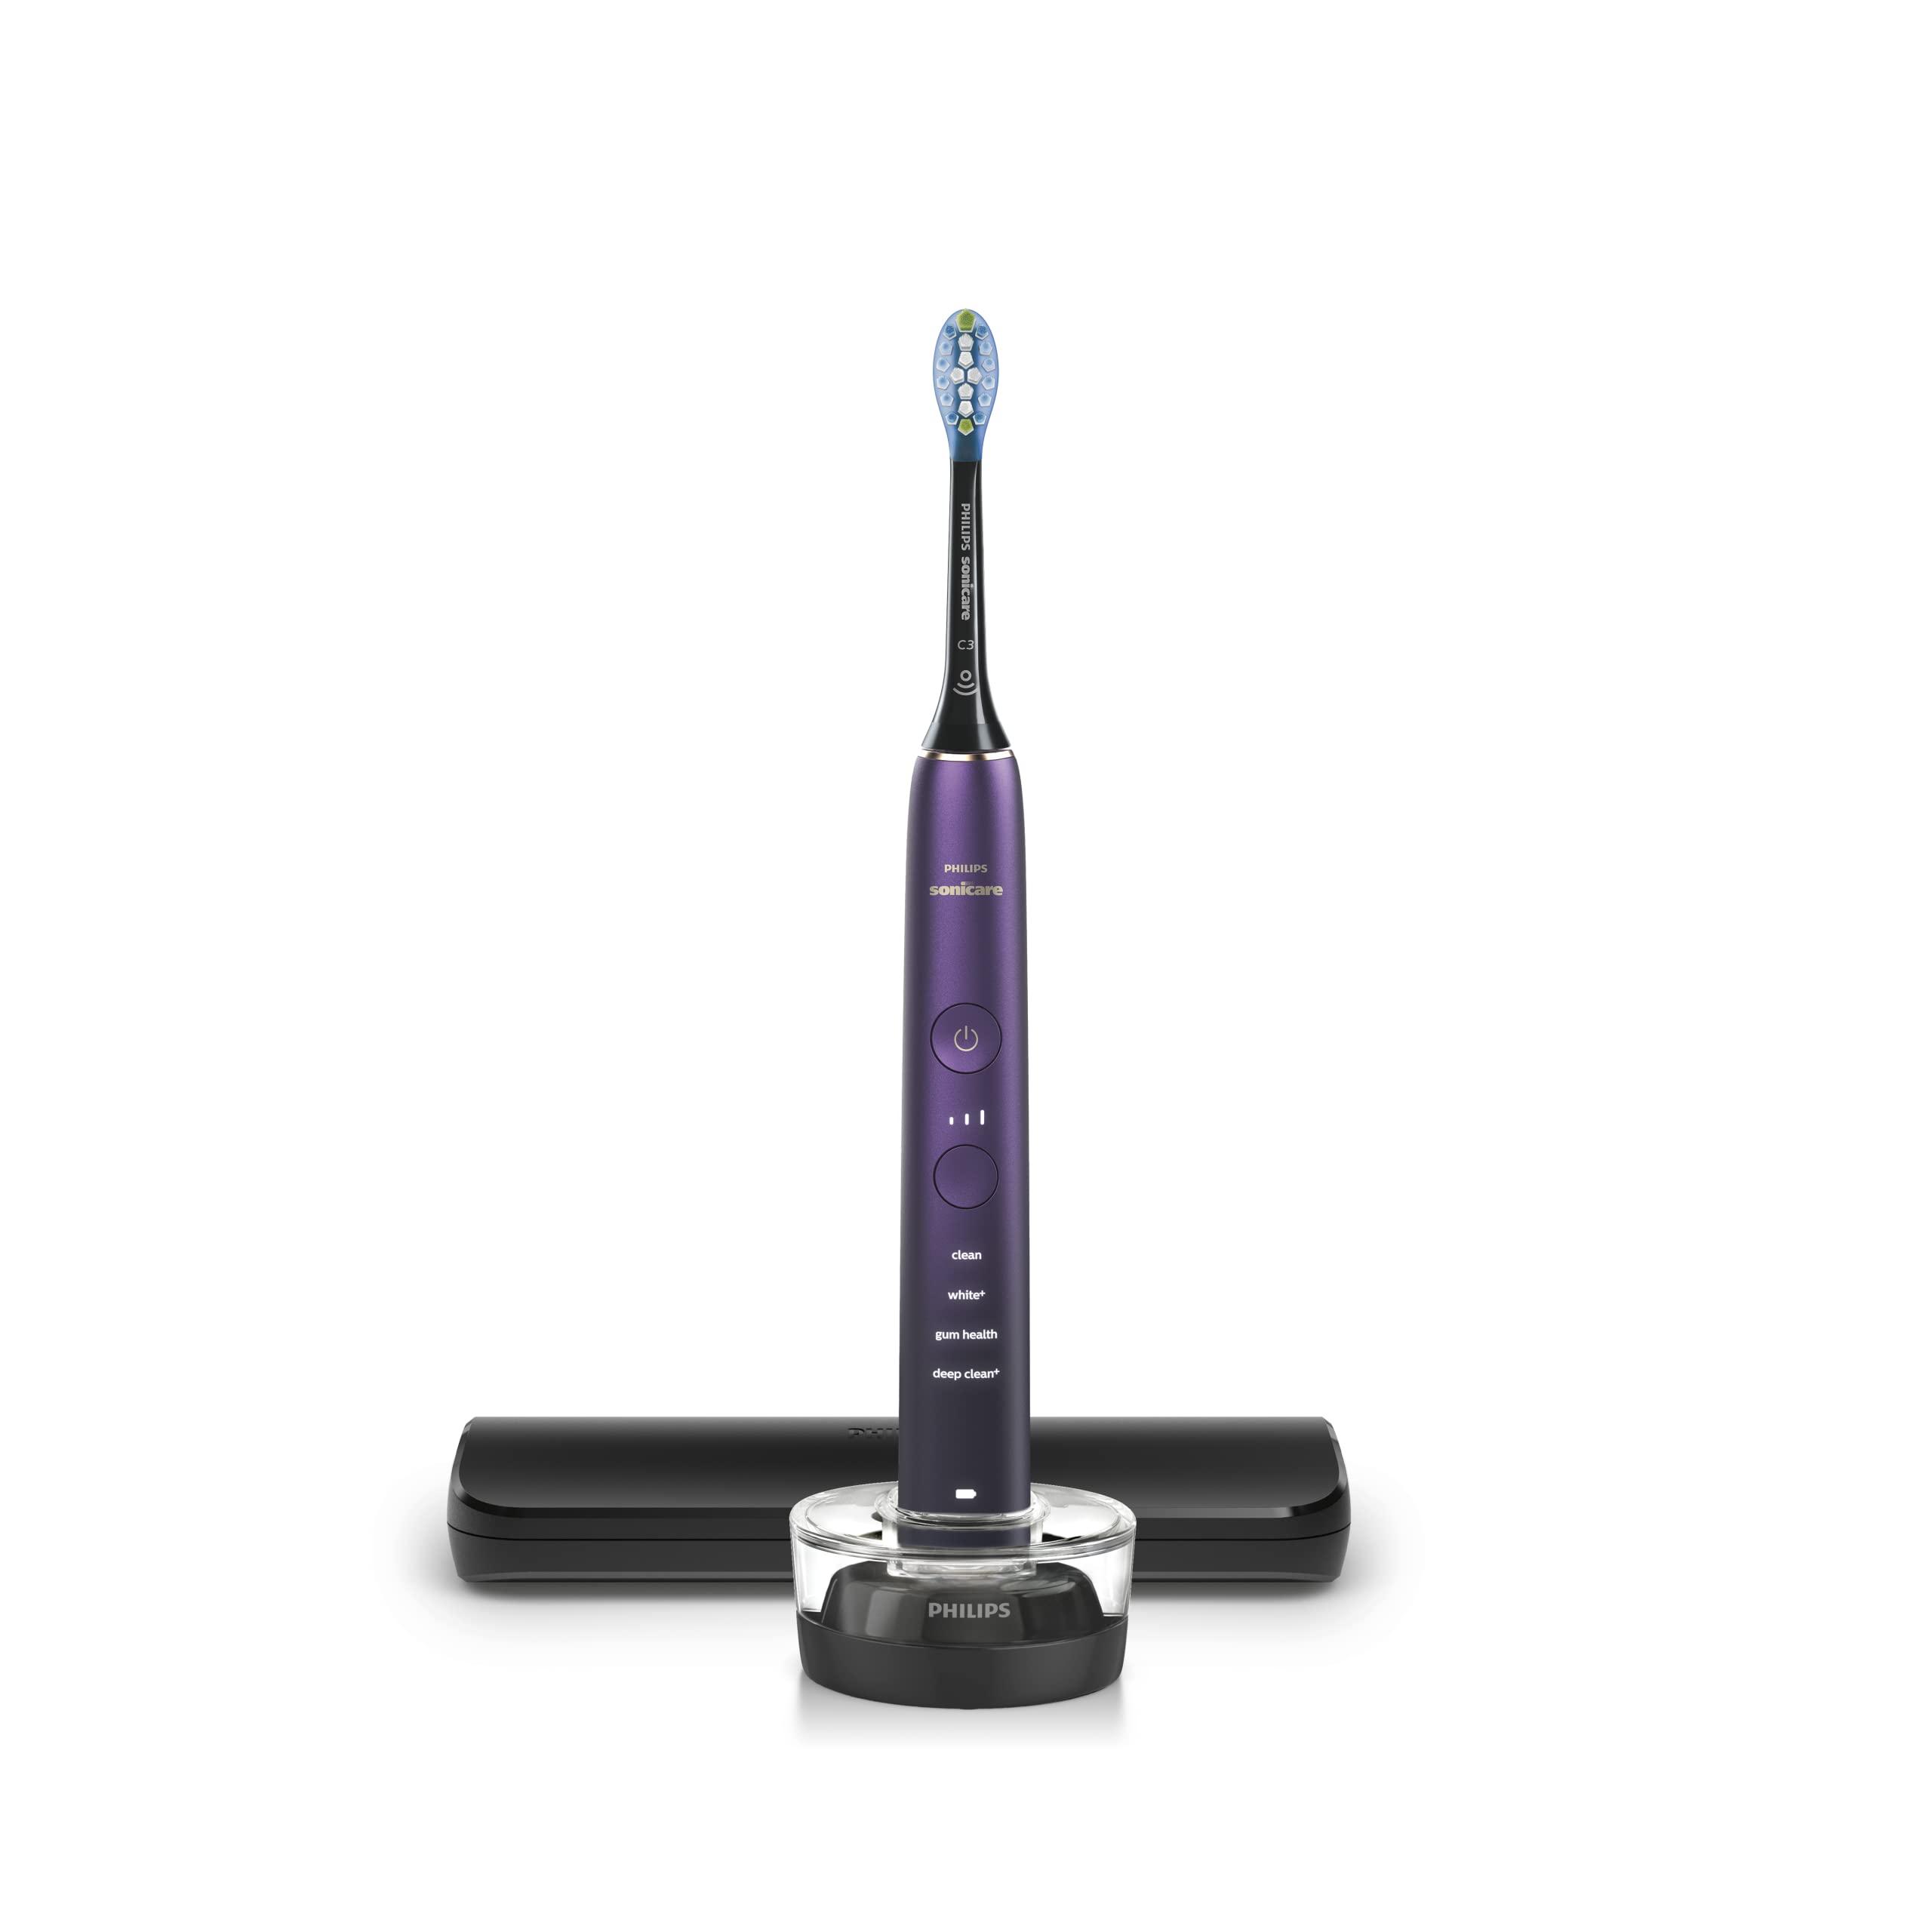 PHILIPS Sonicare 9000 Special Edition Rechargeable Toothbrush, Black/Purple, HX9911/91